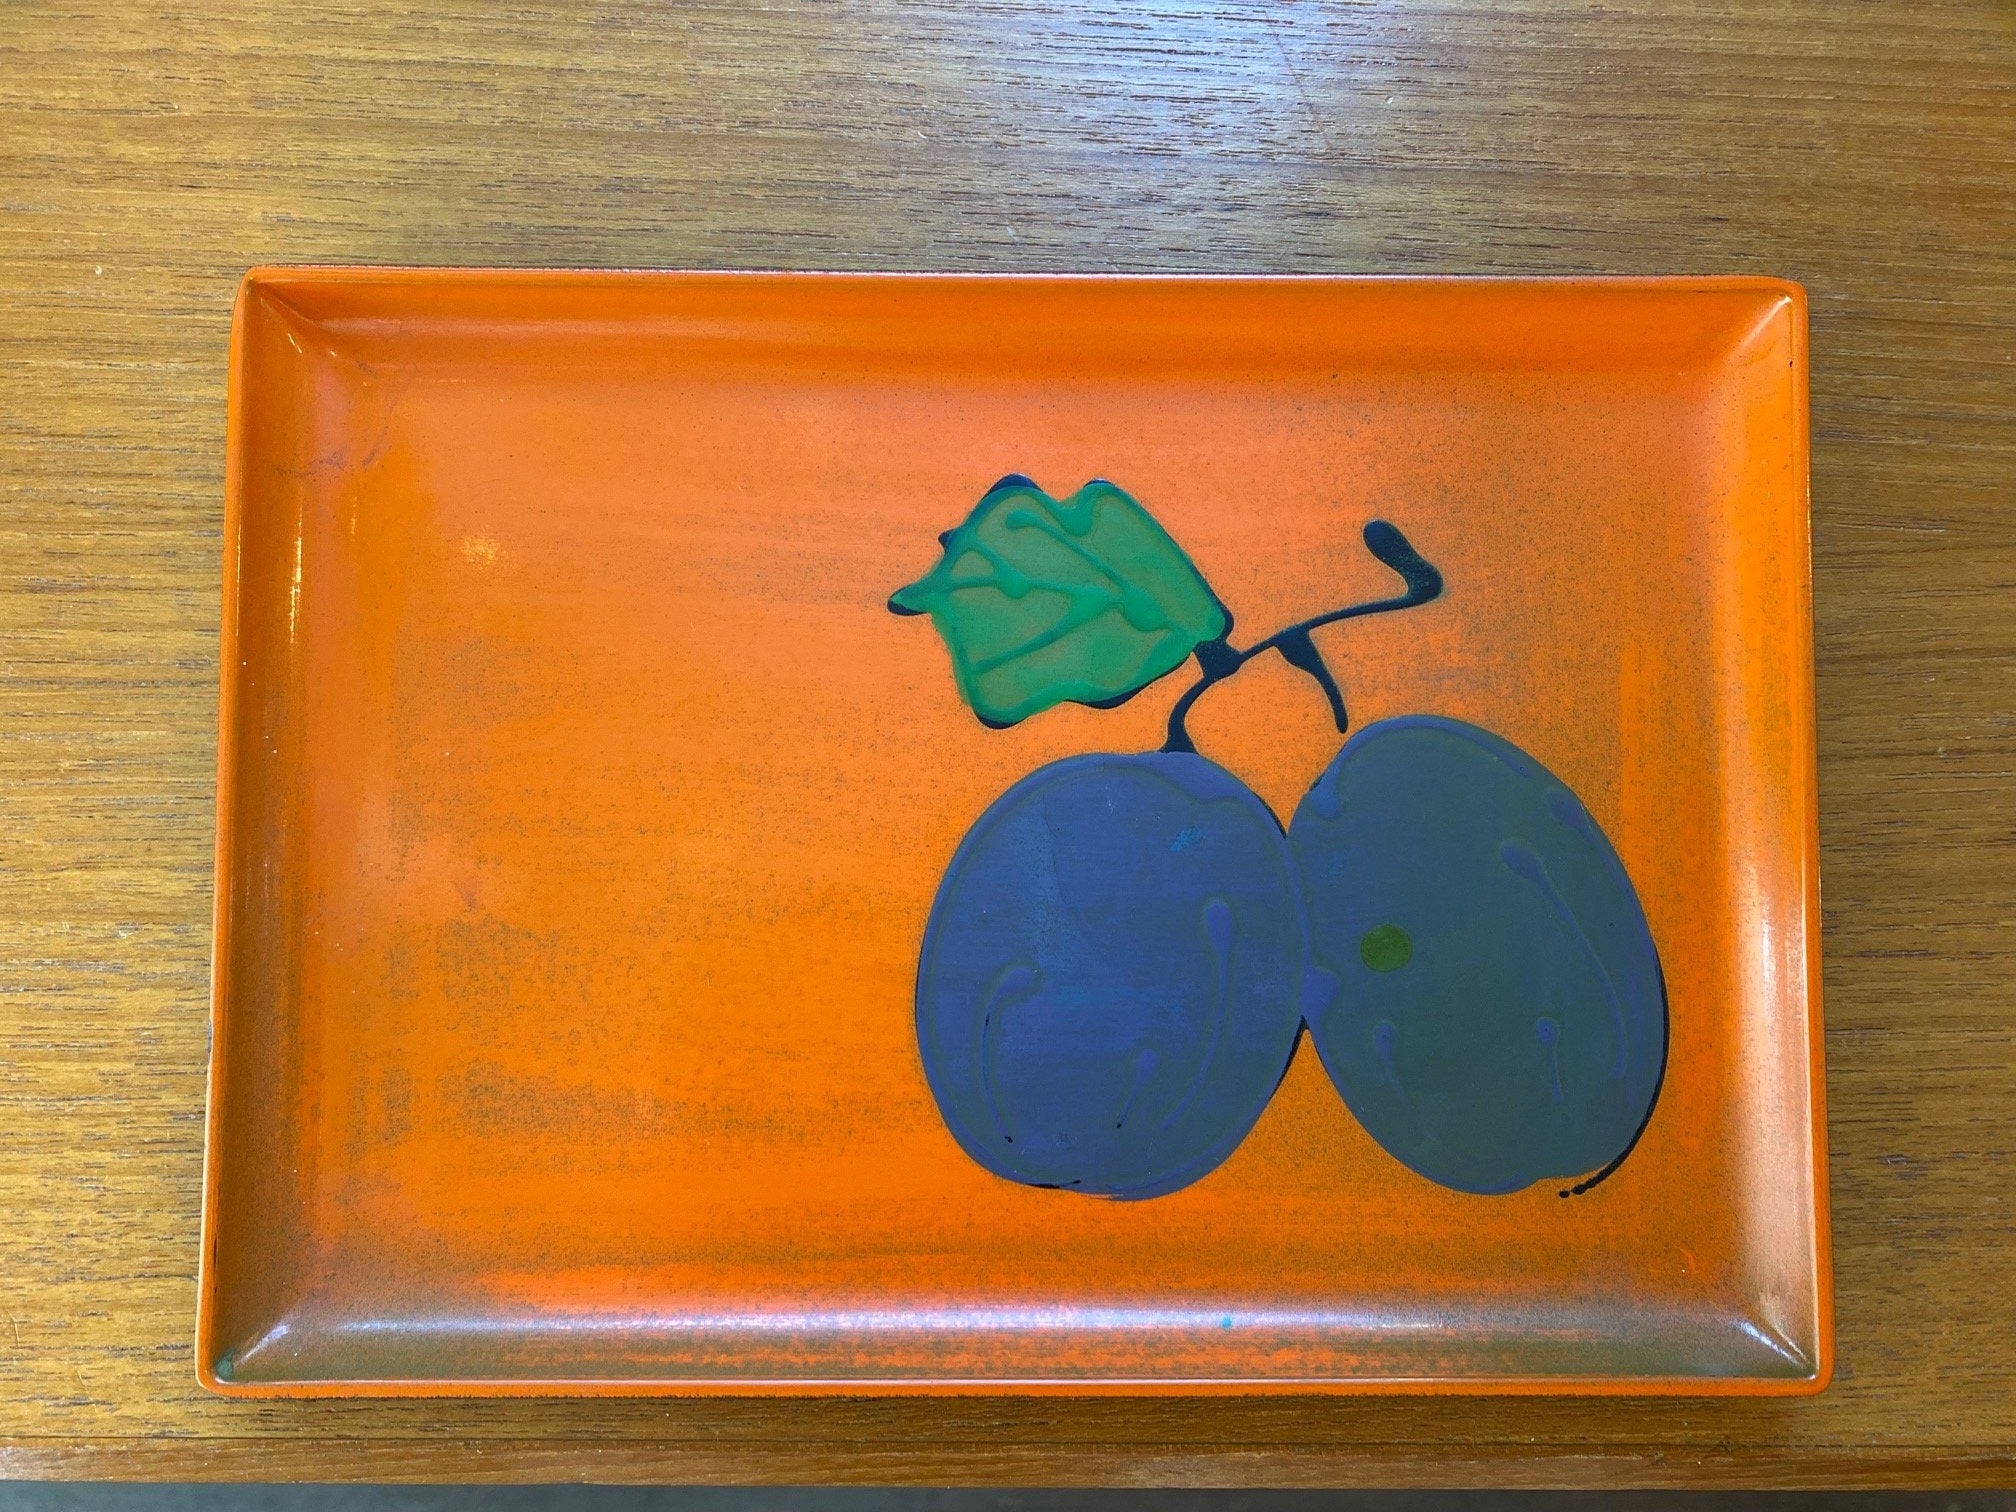 Vintage S.S. Lacquer Ware dish with plums- Cook Street Vintage